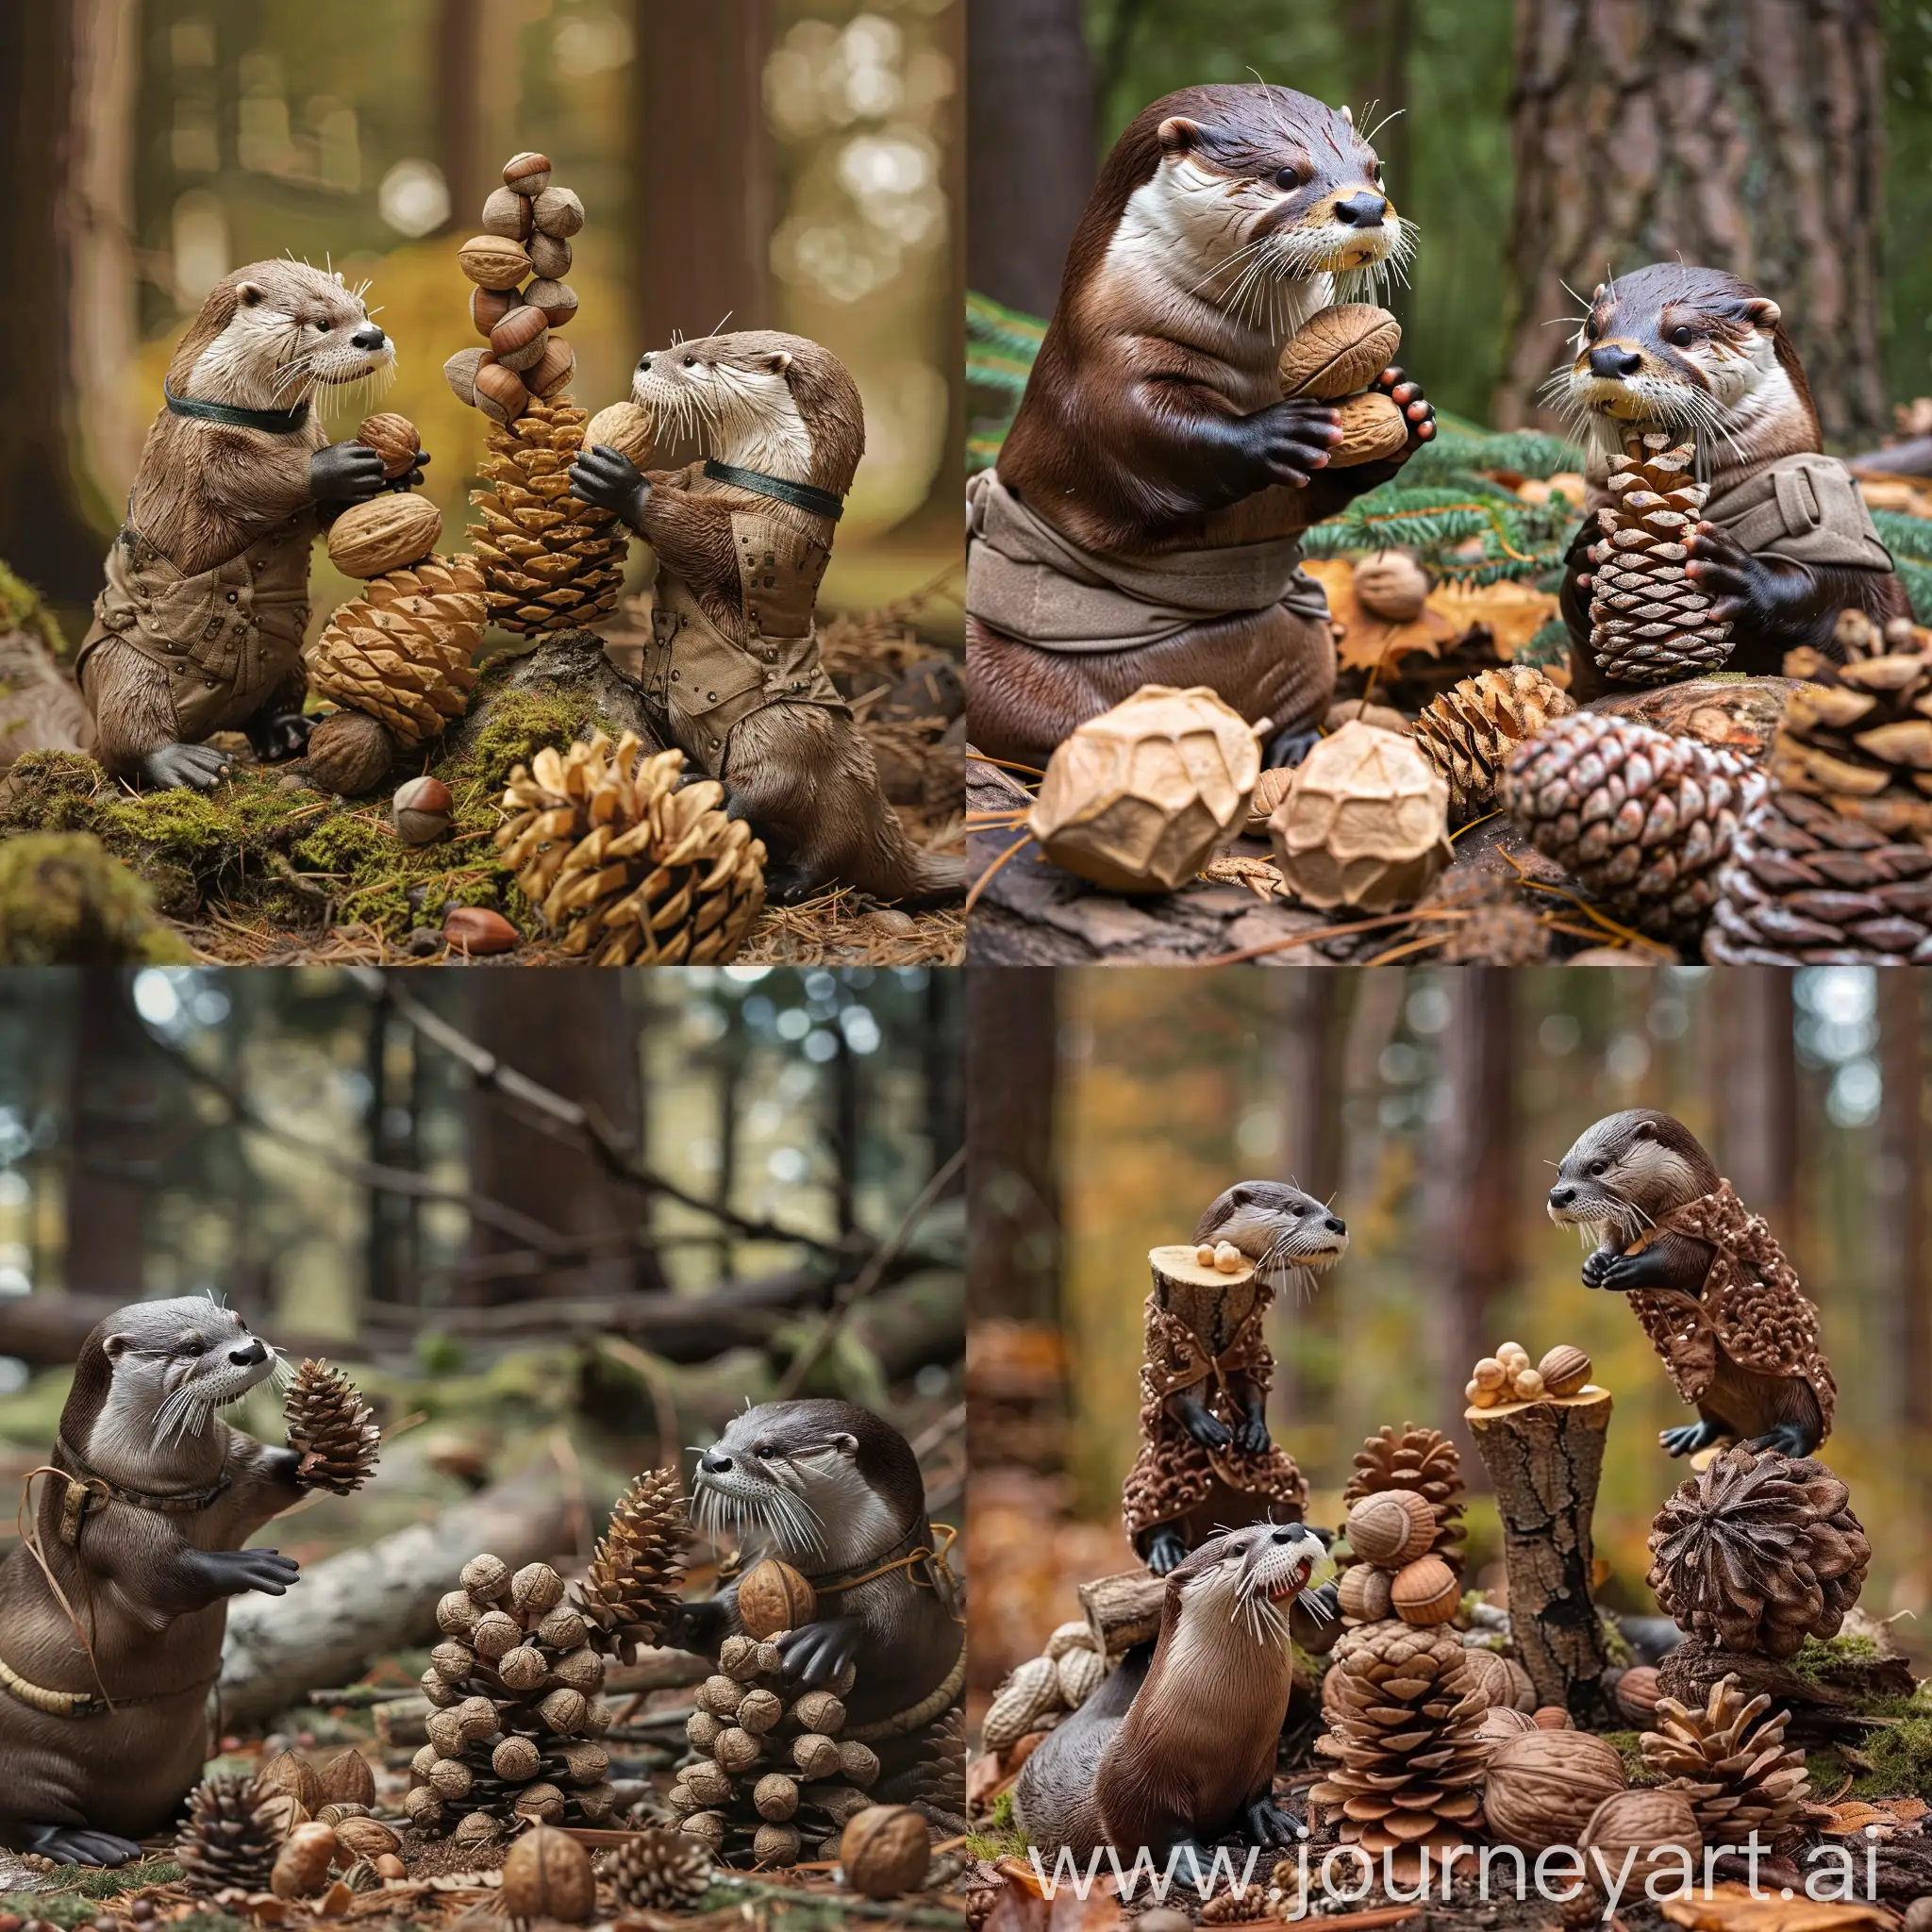 Forest-Otters-Wearing-Gaiters-Stack-Pine-Cones-and-Nuts